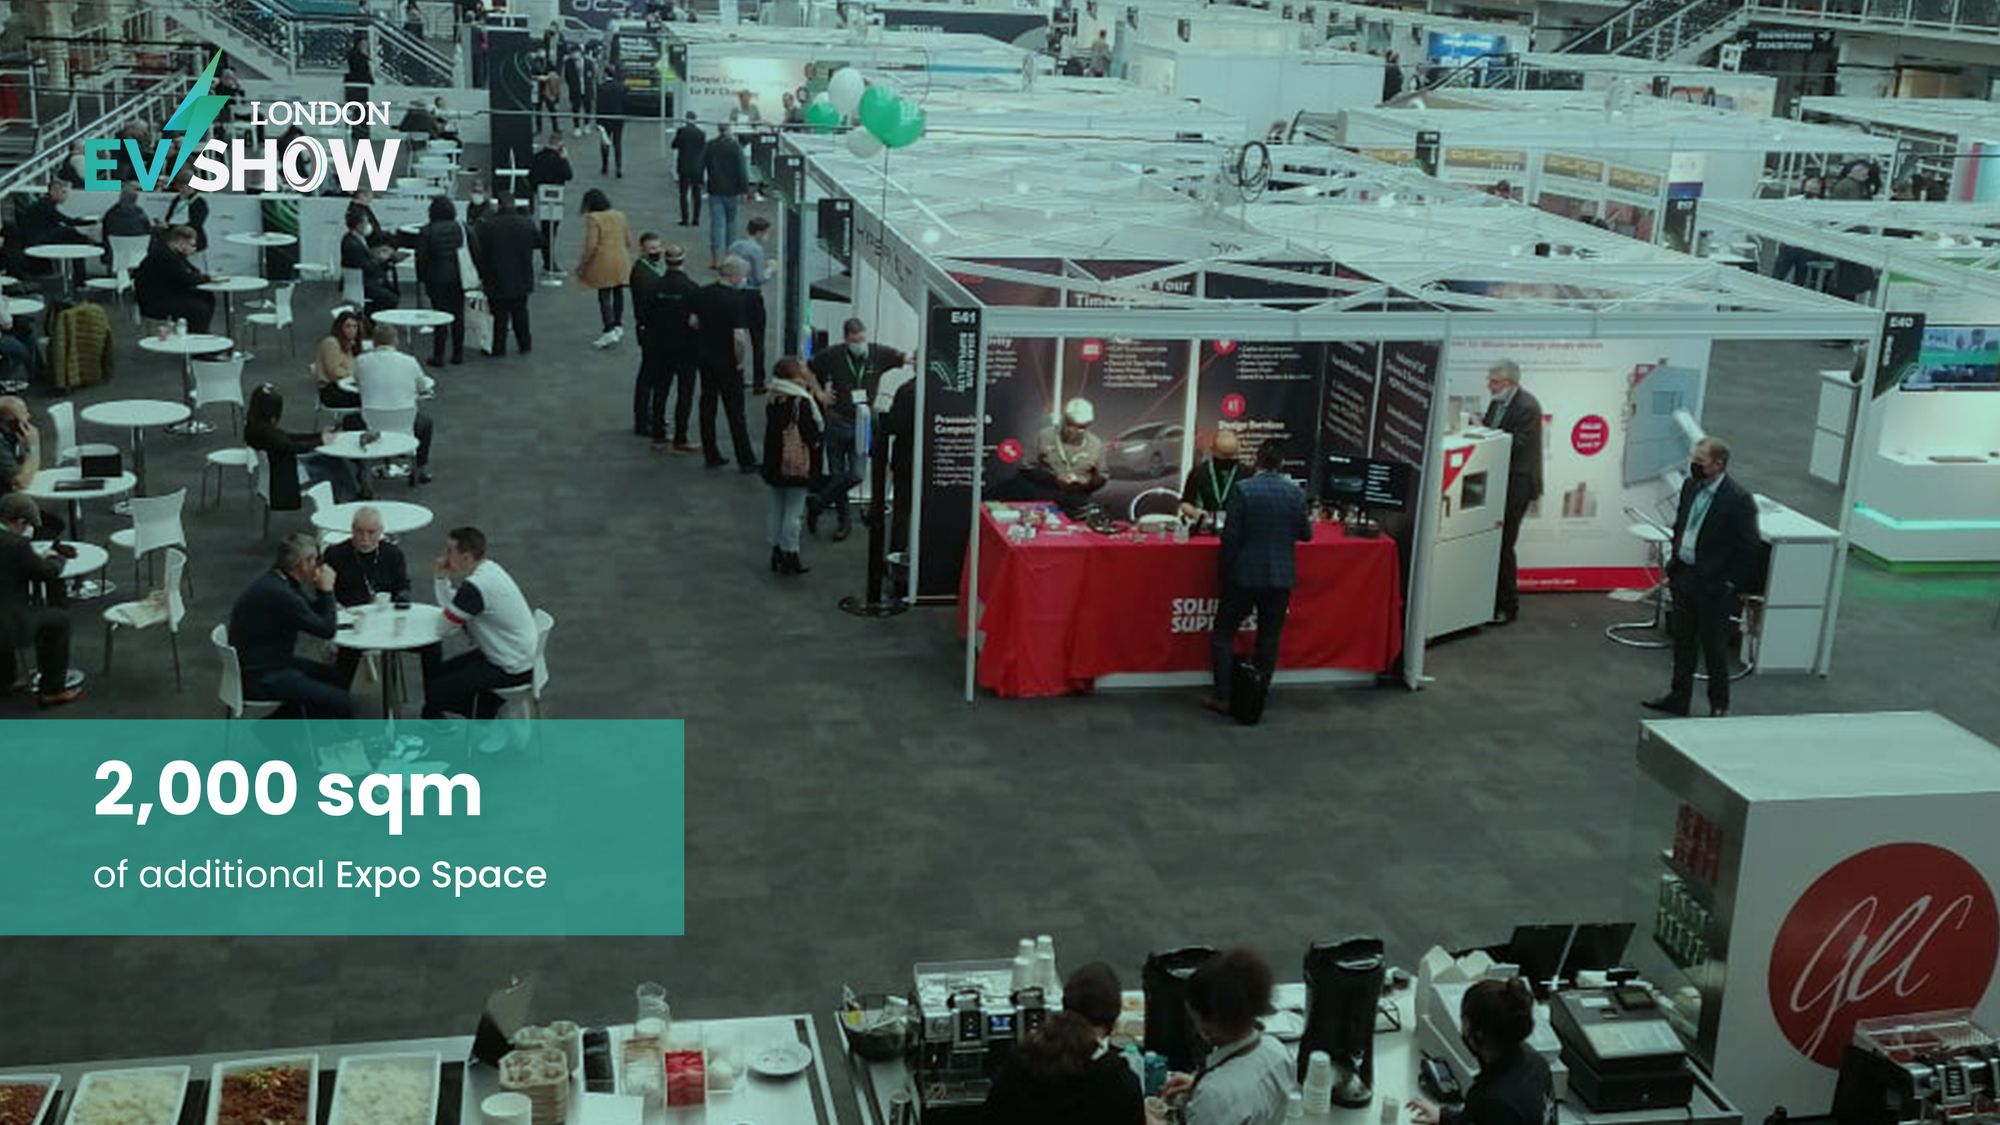 The London EV Show Announces 2000 sqm Of Additional Expo Space After Overwhelming Response This Year.